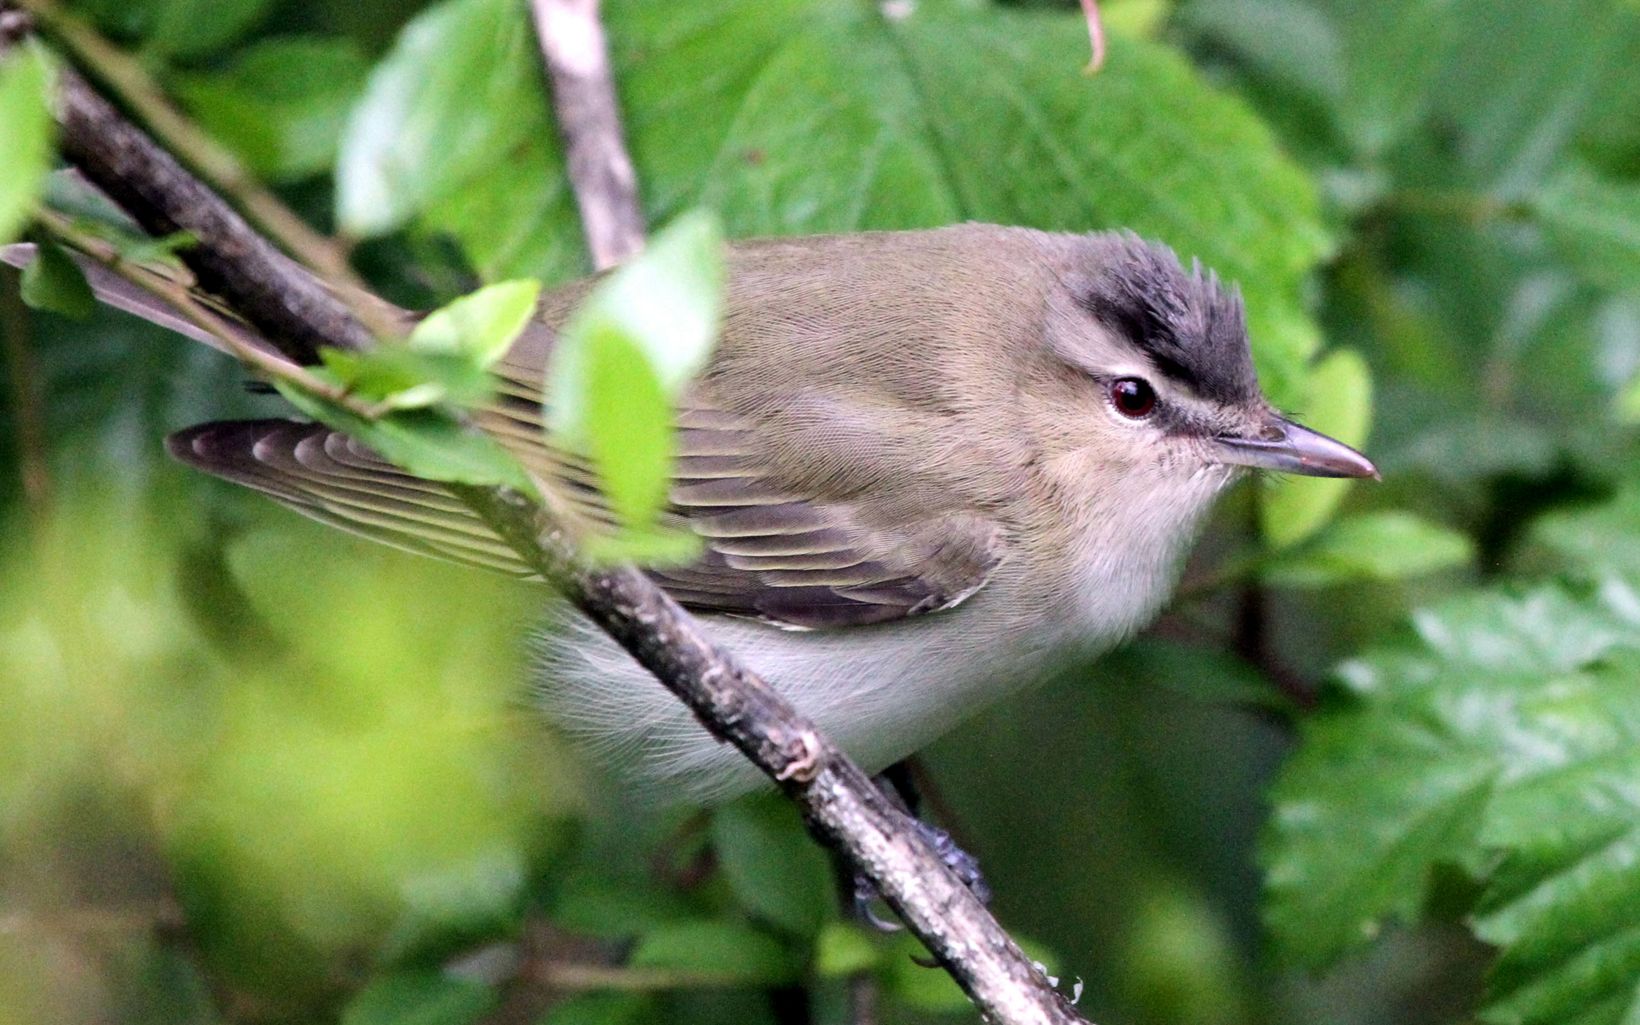 A fluffy gray bird rests in a branch.